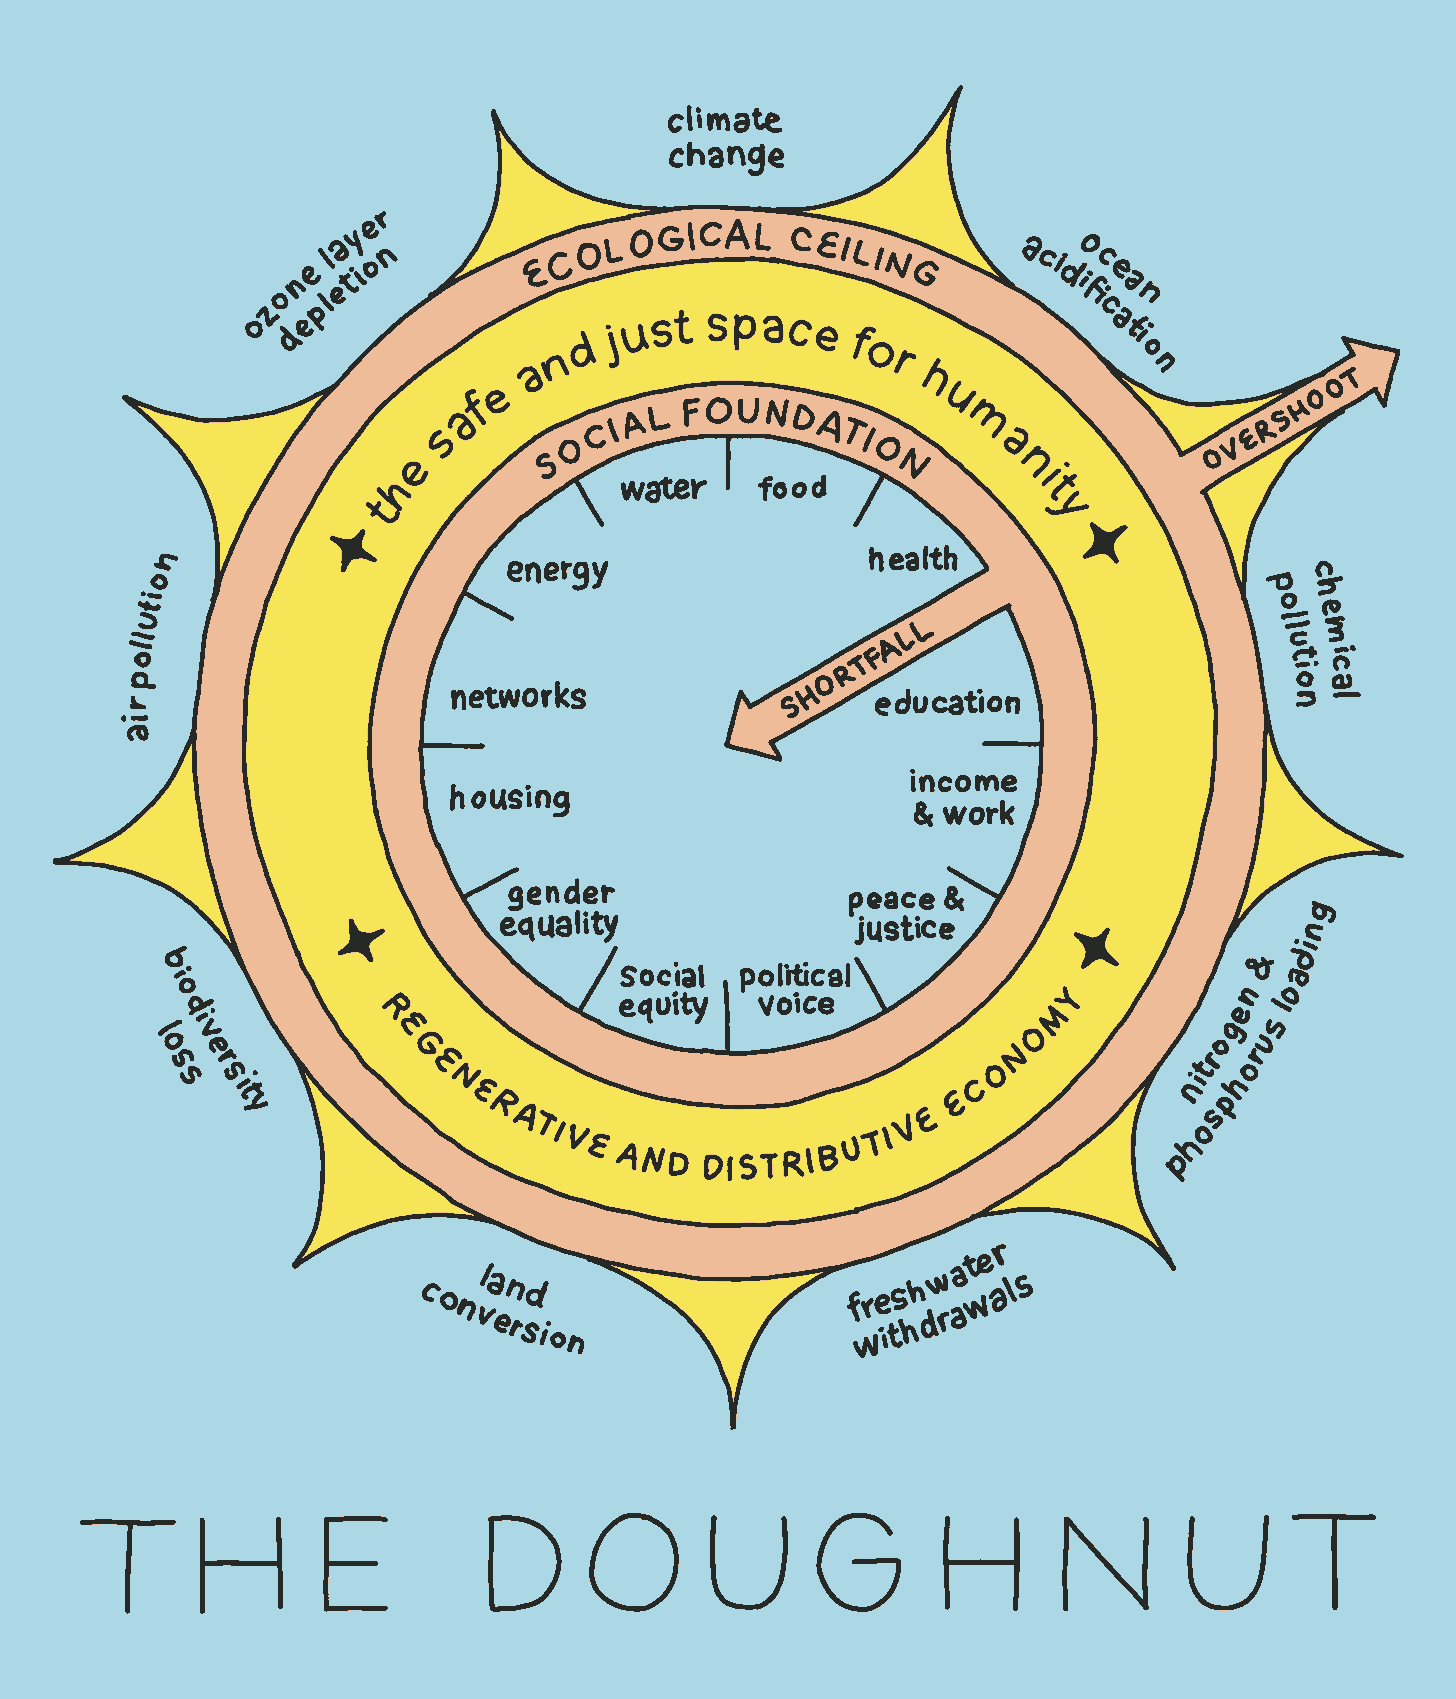 Visual explanation of doughnut economics, showing shortfalls on the inside of the doughnut, overshoot on the outside of the doughnut, and "the safe and just space for humanity" in the middle of the donut